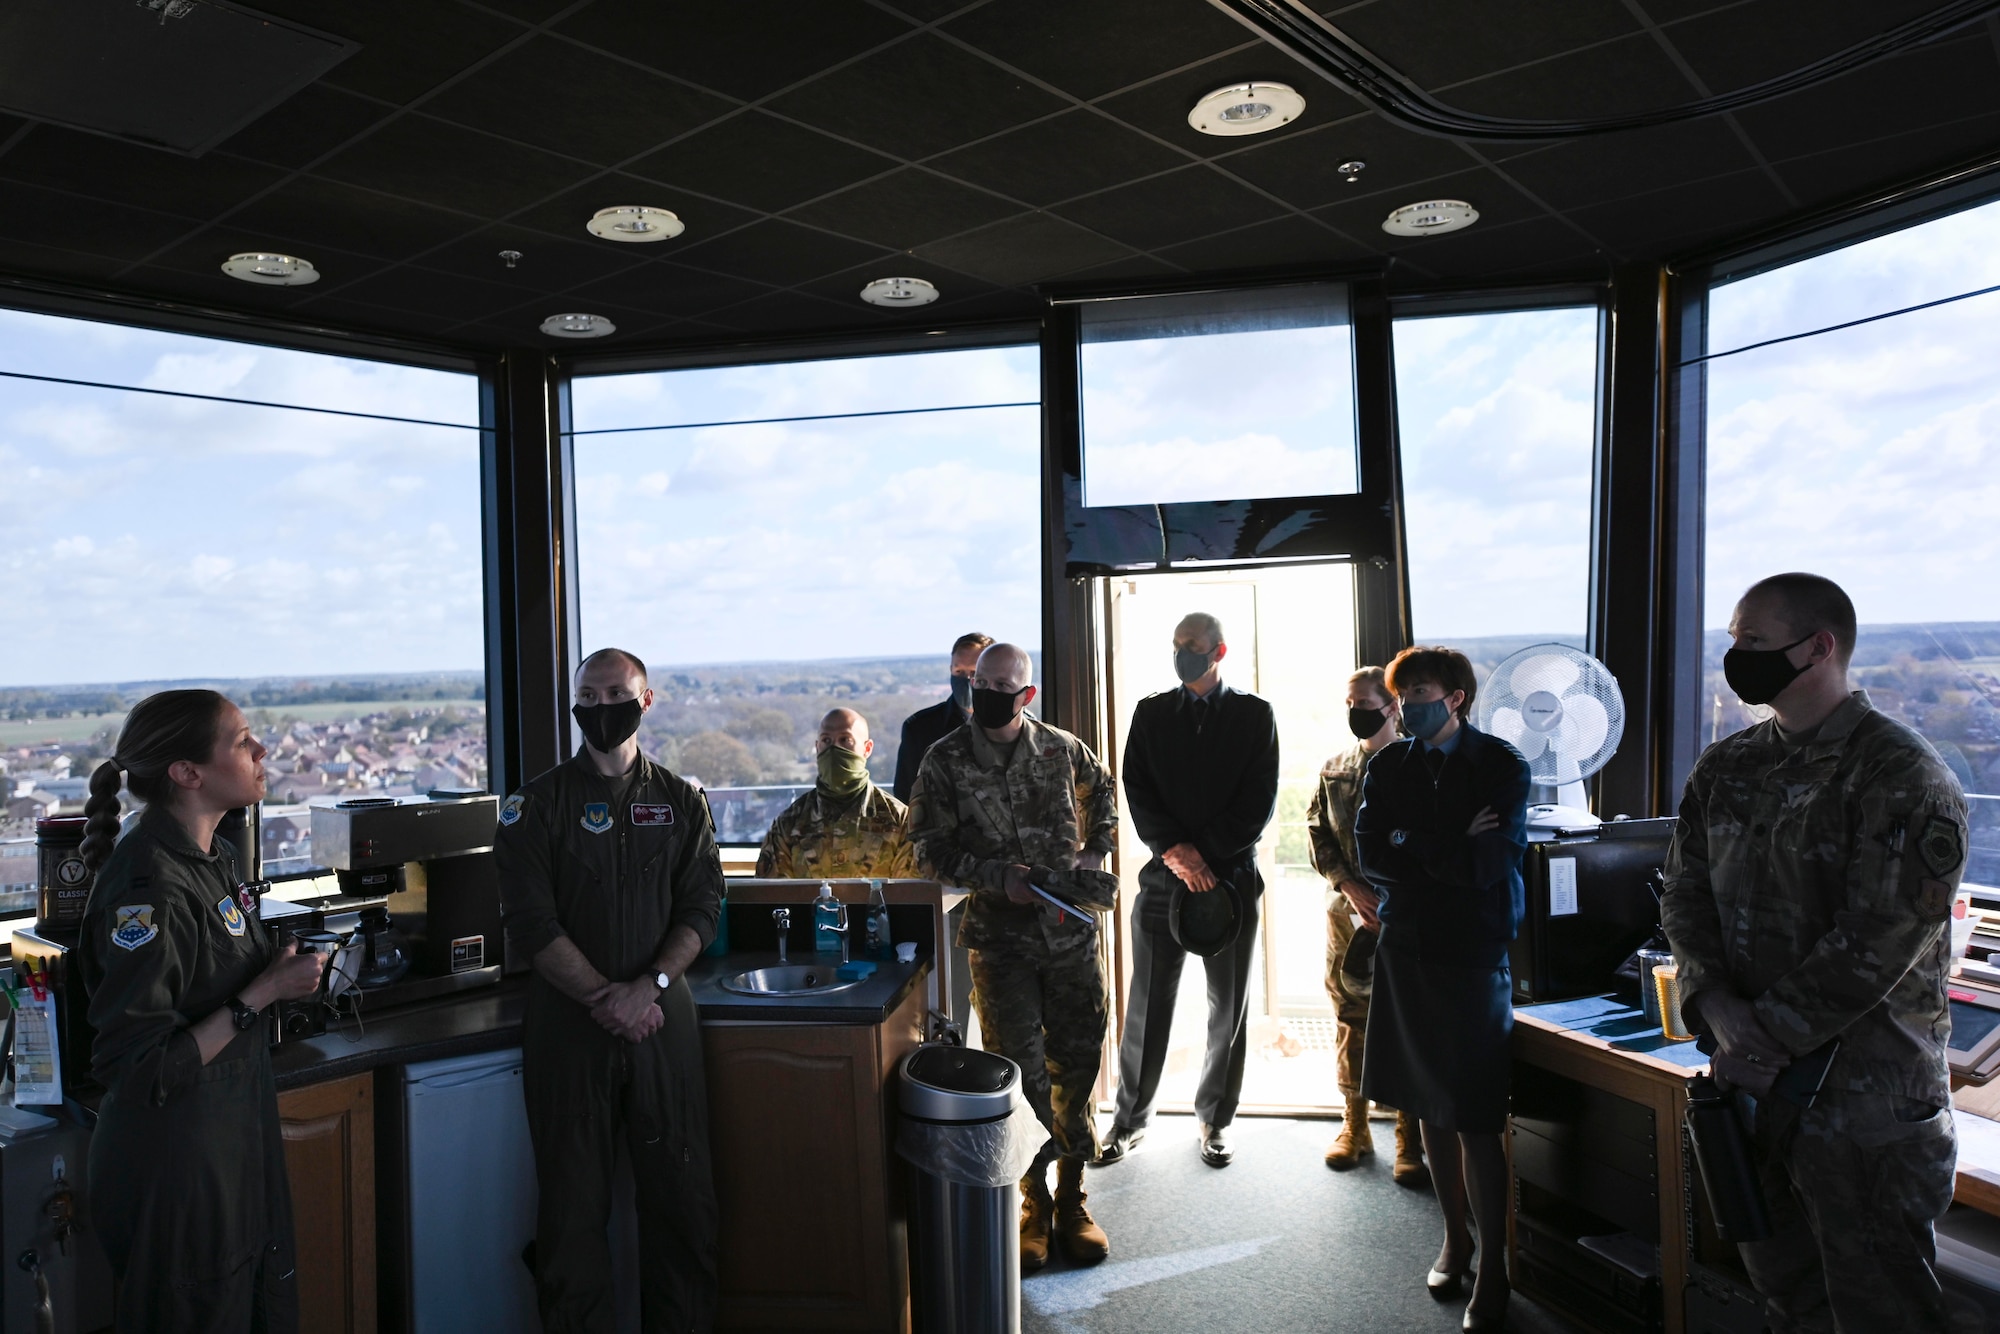 U.S. Airmen assigned to the 100th Air Refueling Wing speak about the strategic importance of the KC-135 Stratotanker aircraft with Gp Capt Joanne Campbell, Royal Air Force Cranwell station commander, inside the air traffic control tower at RAF Mildenhall, England, May 5, 2021. Campbell visited the base to learn about the missions and capabilities of the installation's two wings. (U.S. Air Force photo by Senior Airman Joseph Barron)